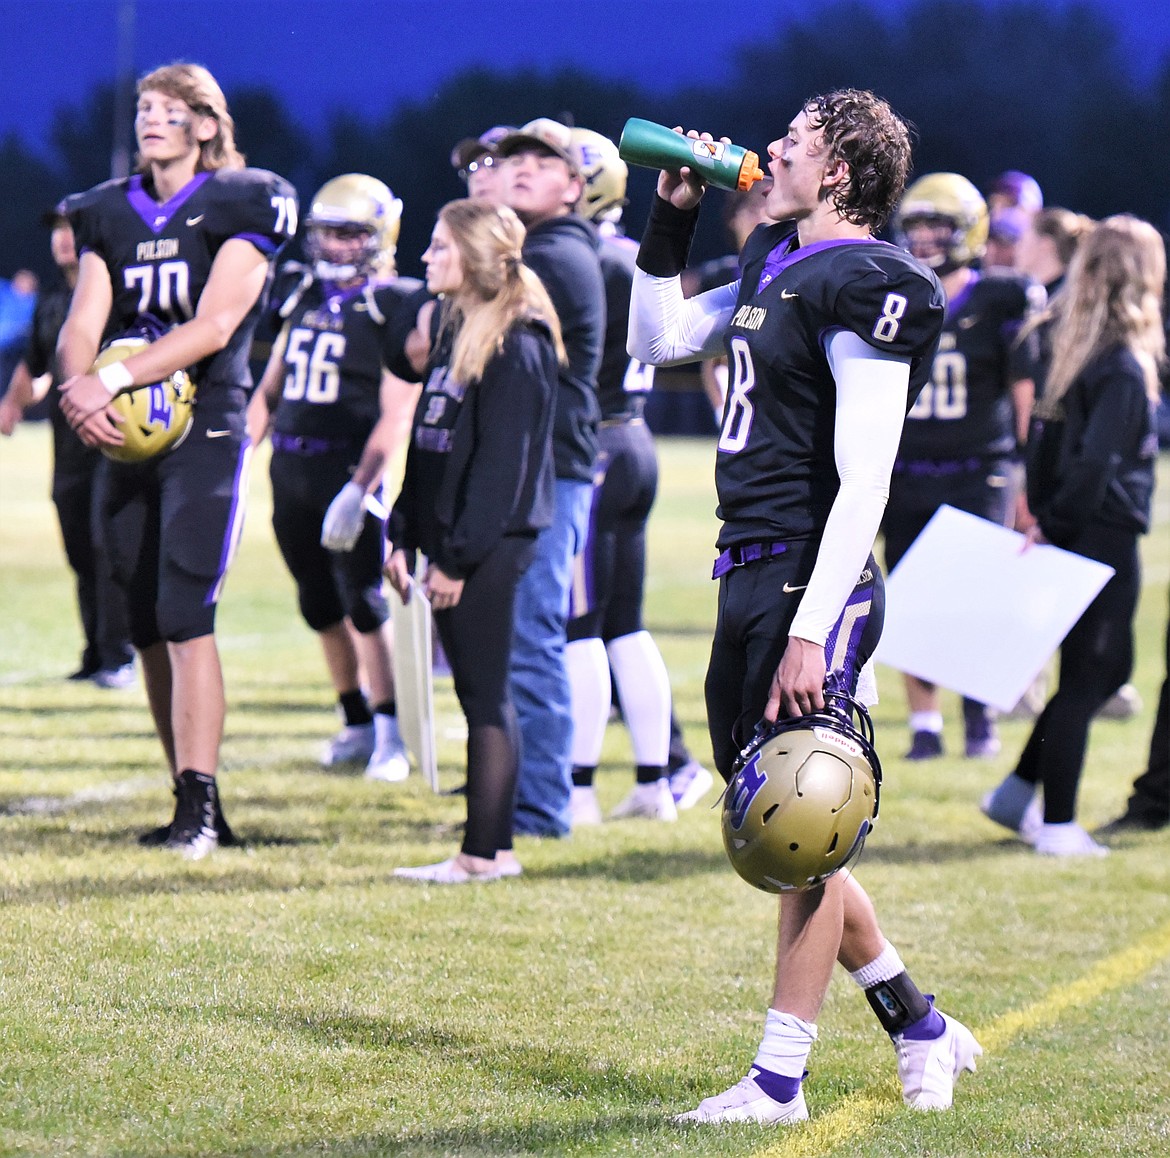 Jarrett Wilson takes a break on the sideline during the Pirates' win over Ronan. (Scot Heisel/Lake County Leader)